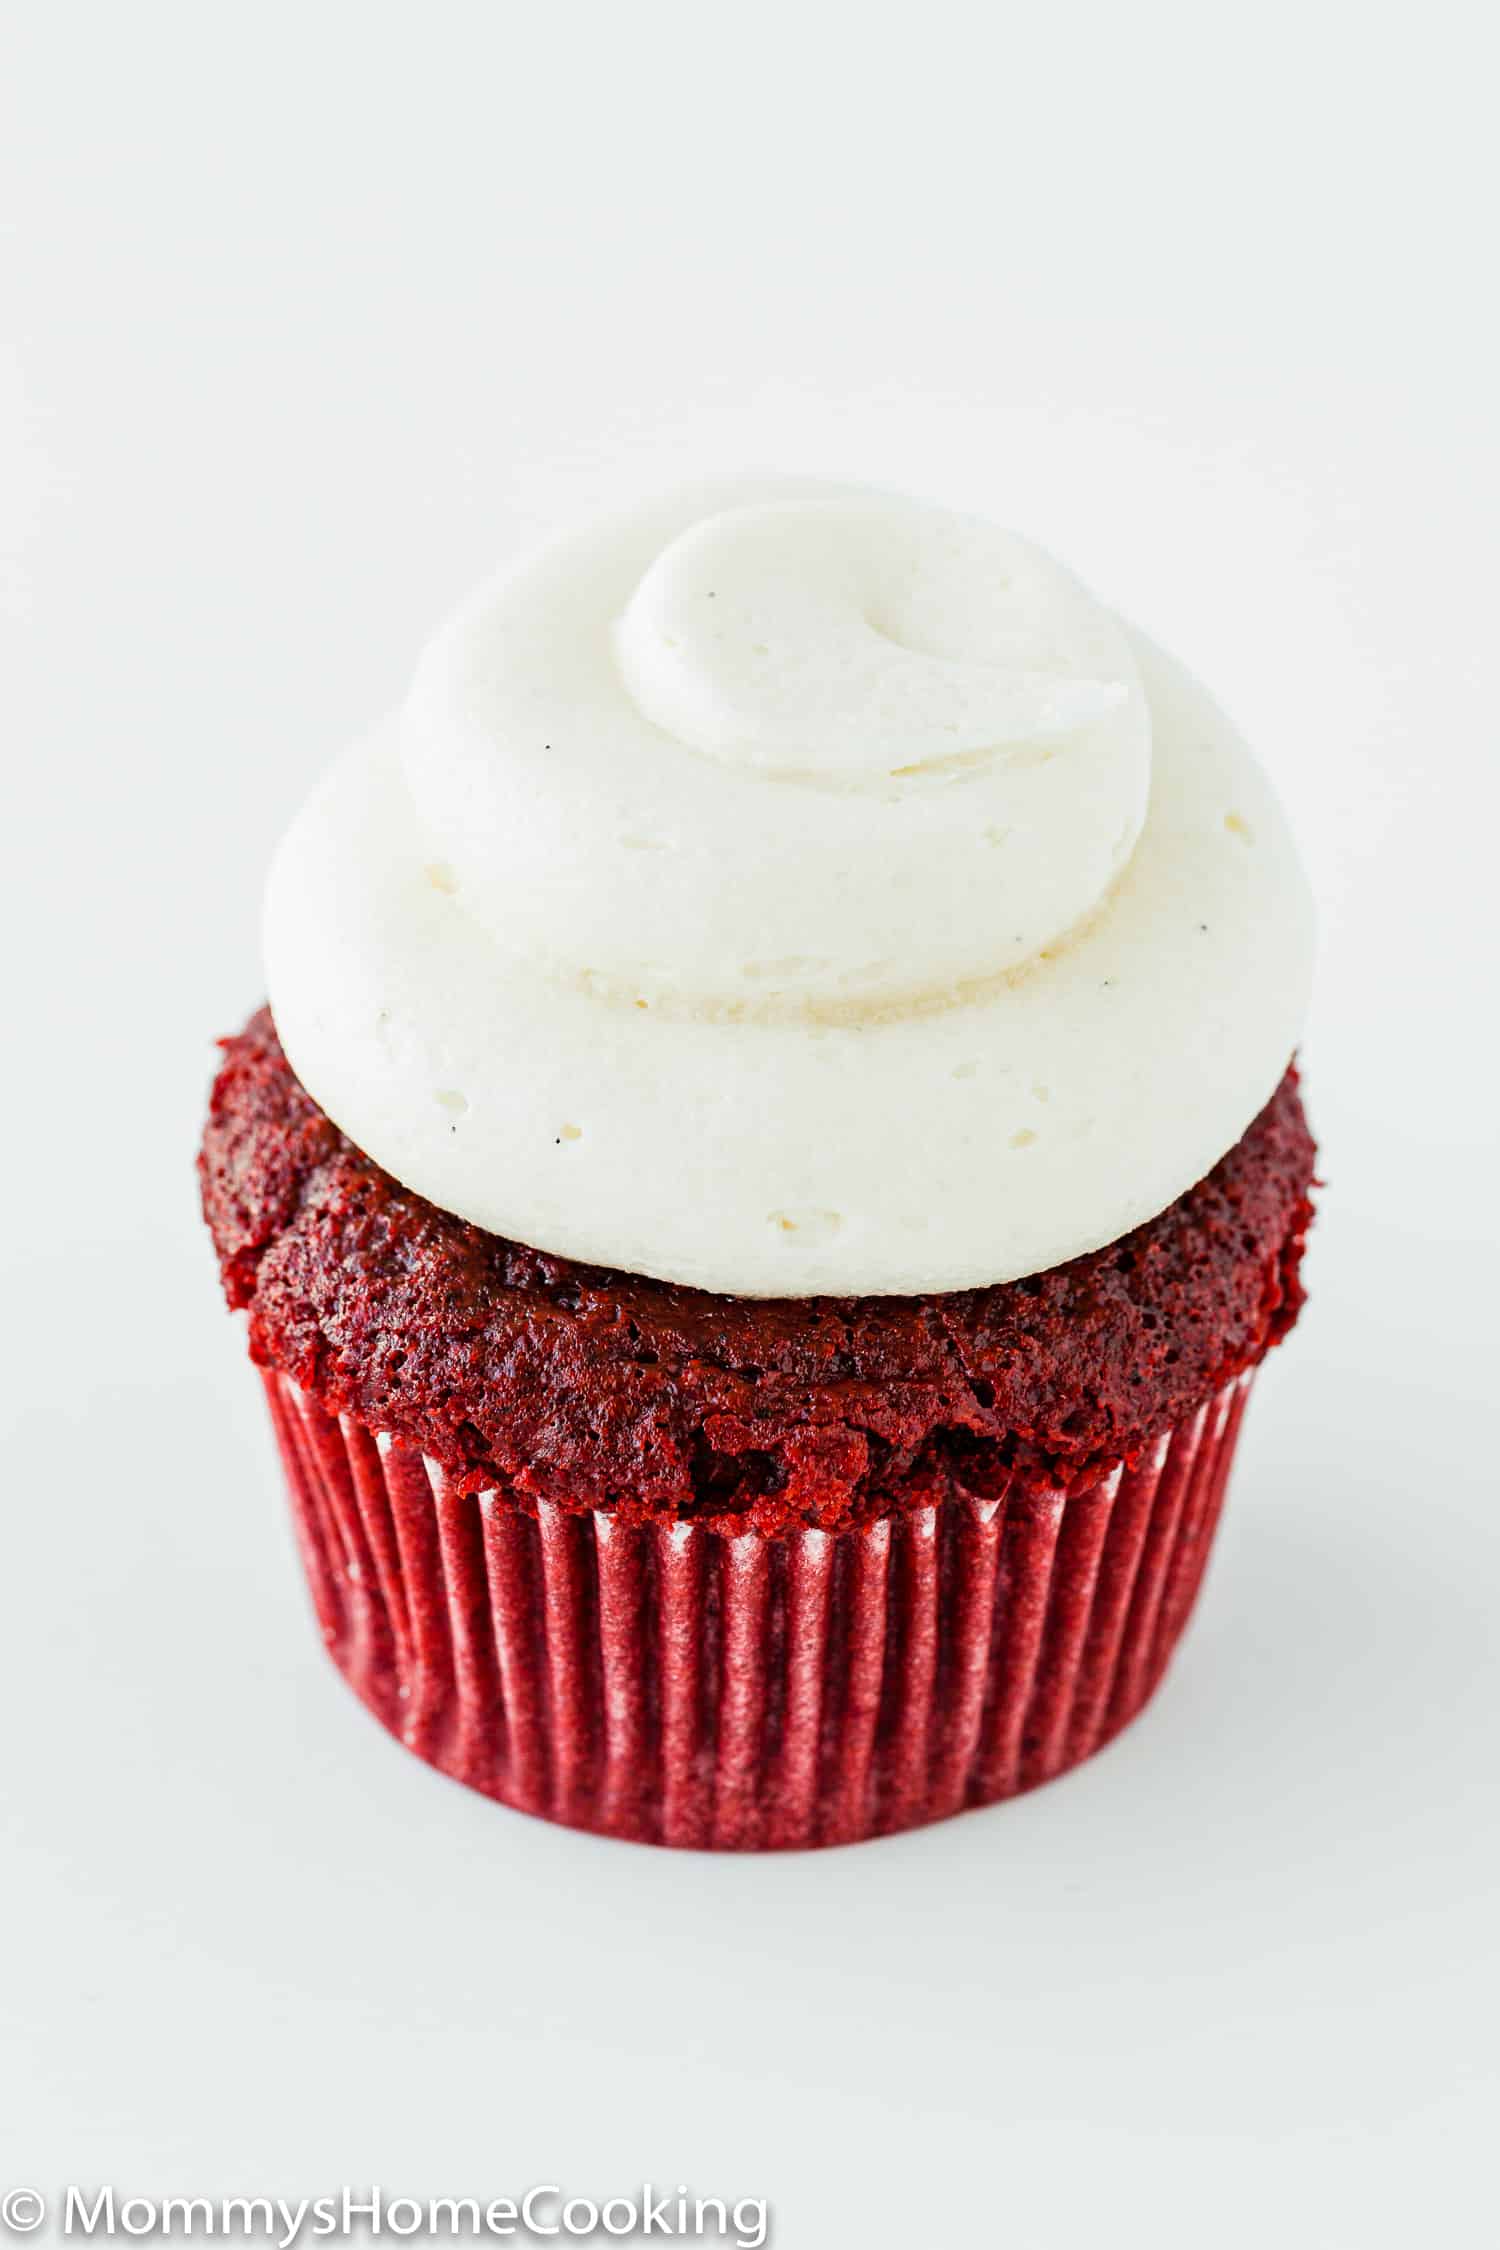 baked egg-free red velvet cupcake with cream cheese frosting.